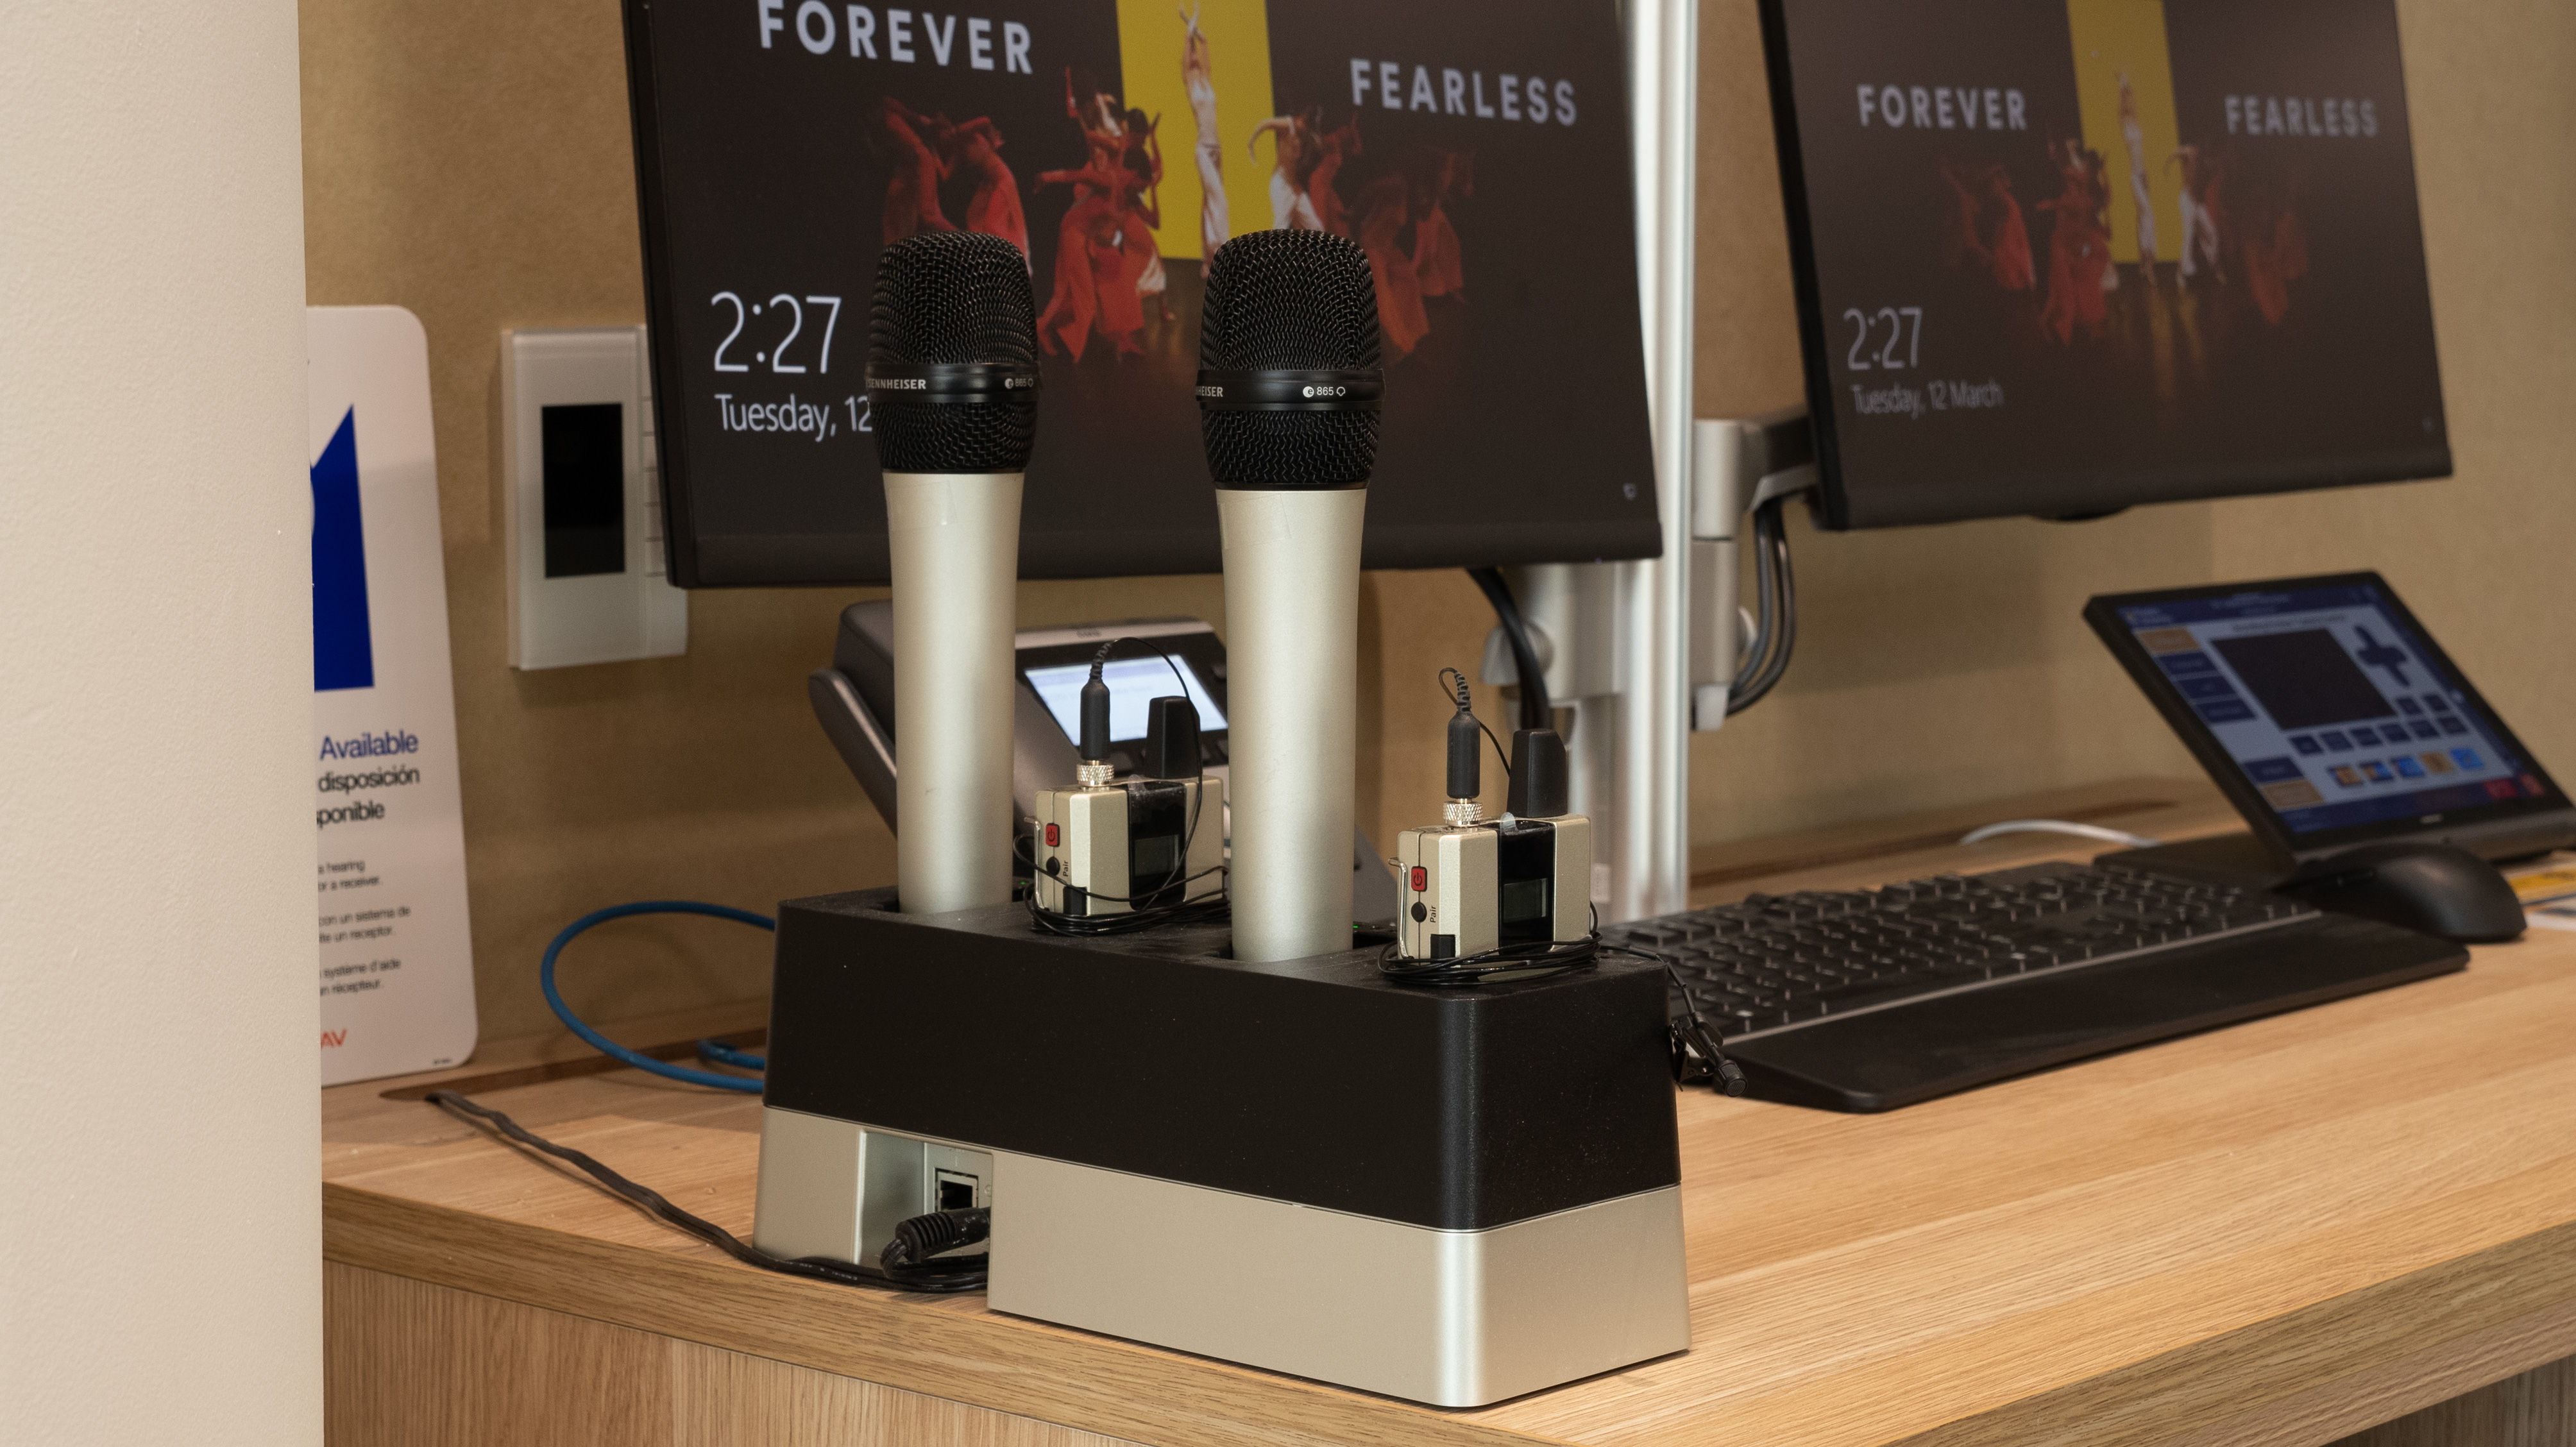 Every teaching space gets four channels of Sennheiser Speechline wireless. Being in the DECT range spared the uni from heavy UHF competition in the area.